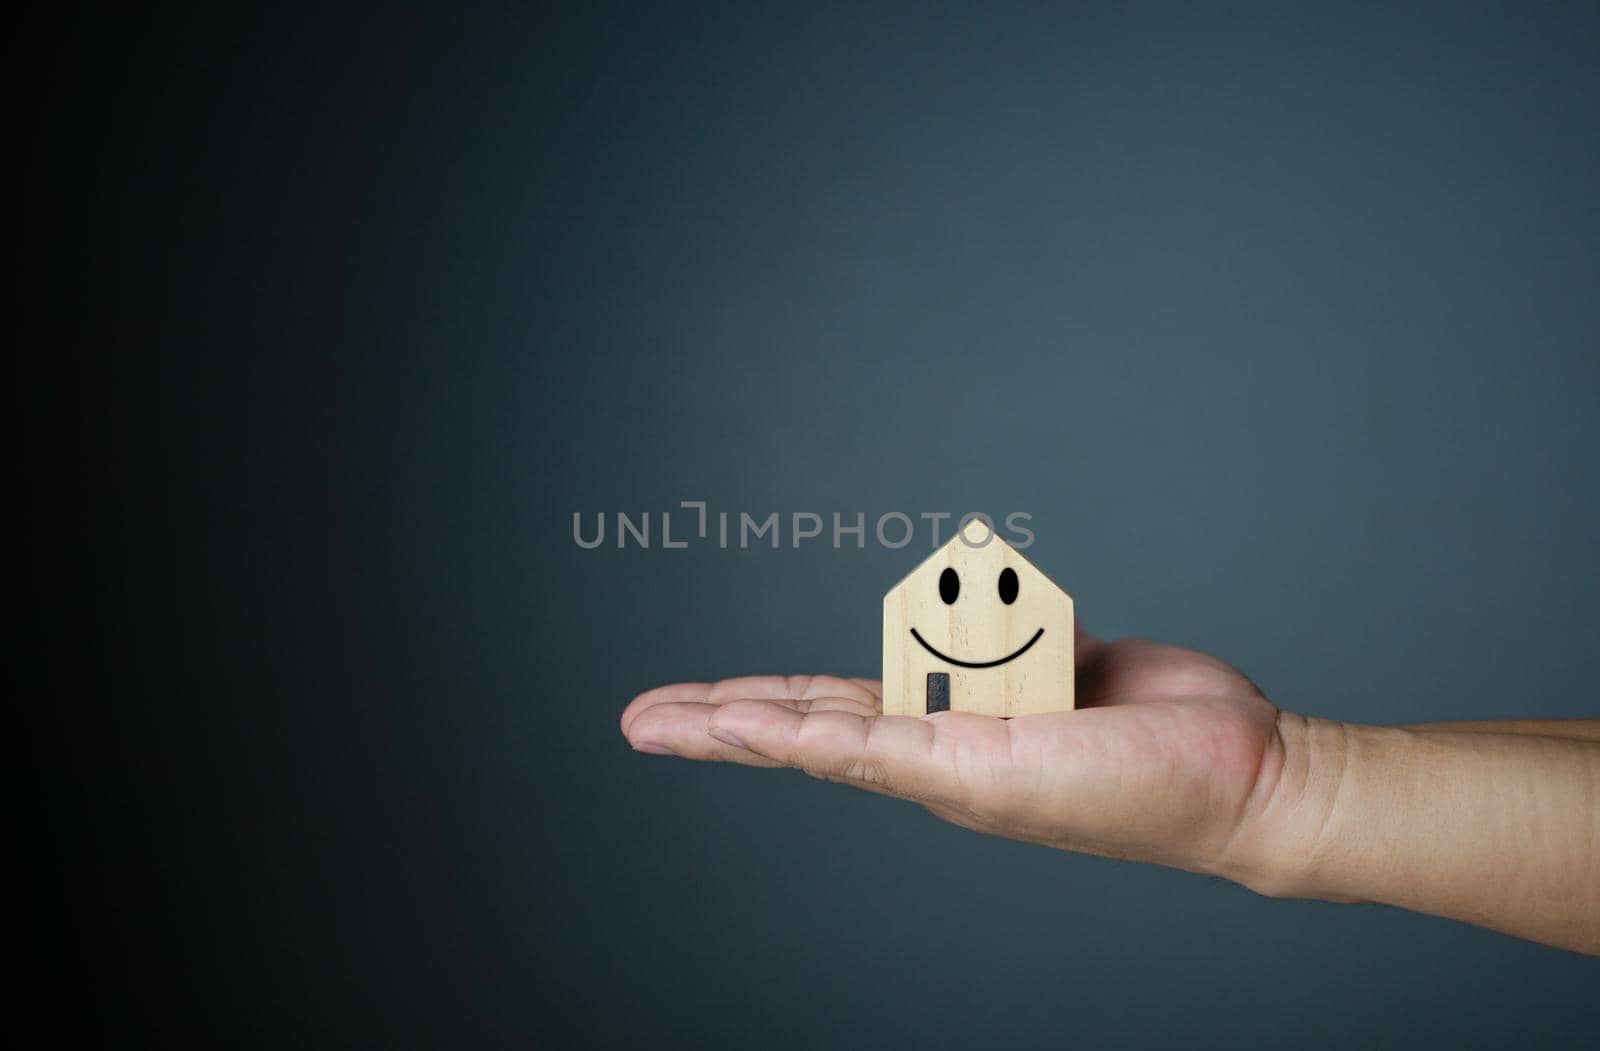 Happy house concept. Hand holding a smiling model house. Indicates happiness and love in the house. by Unimages2527